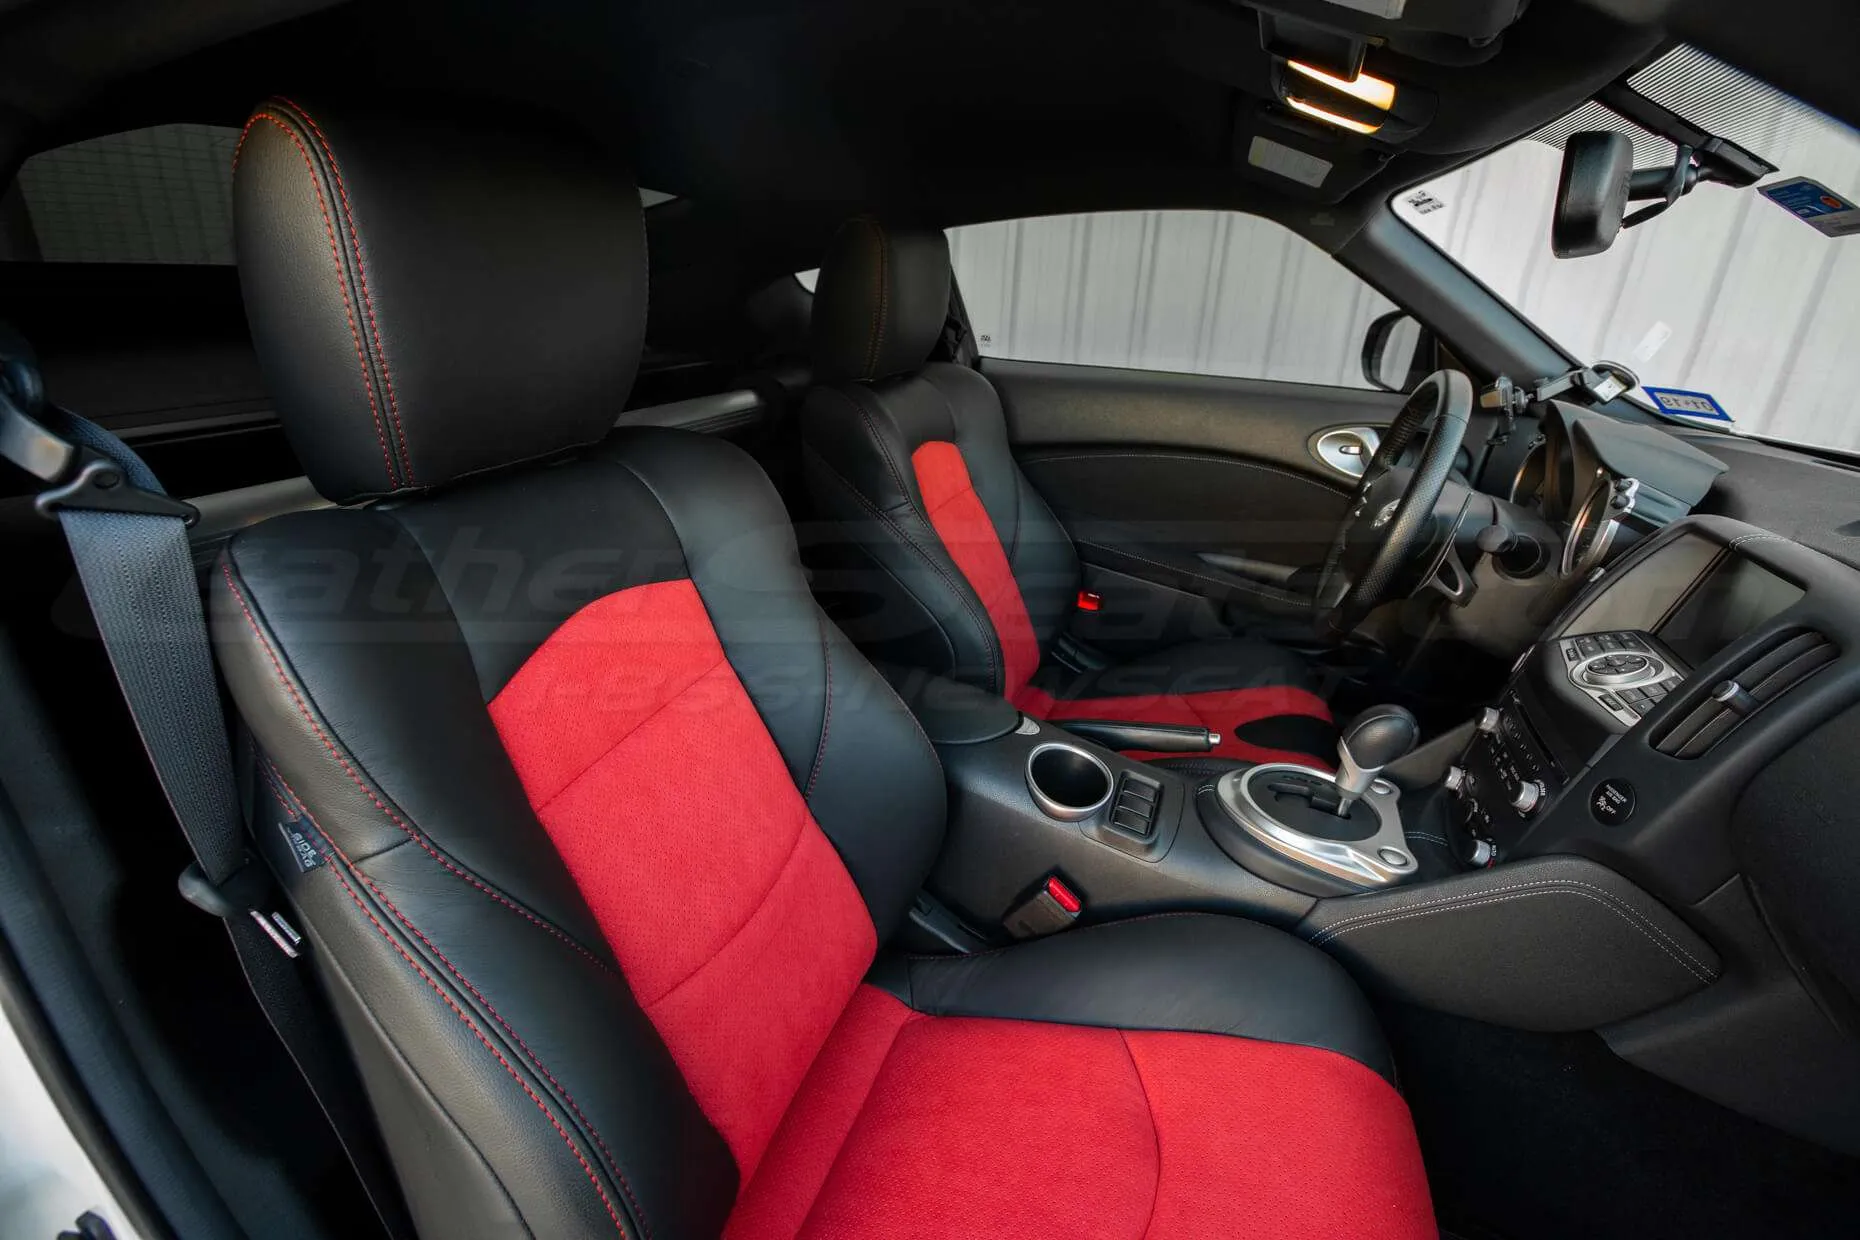 Nissan 370Z Leather Seats - Black & Red Suede - Installed - Front interior from passenger side